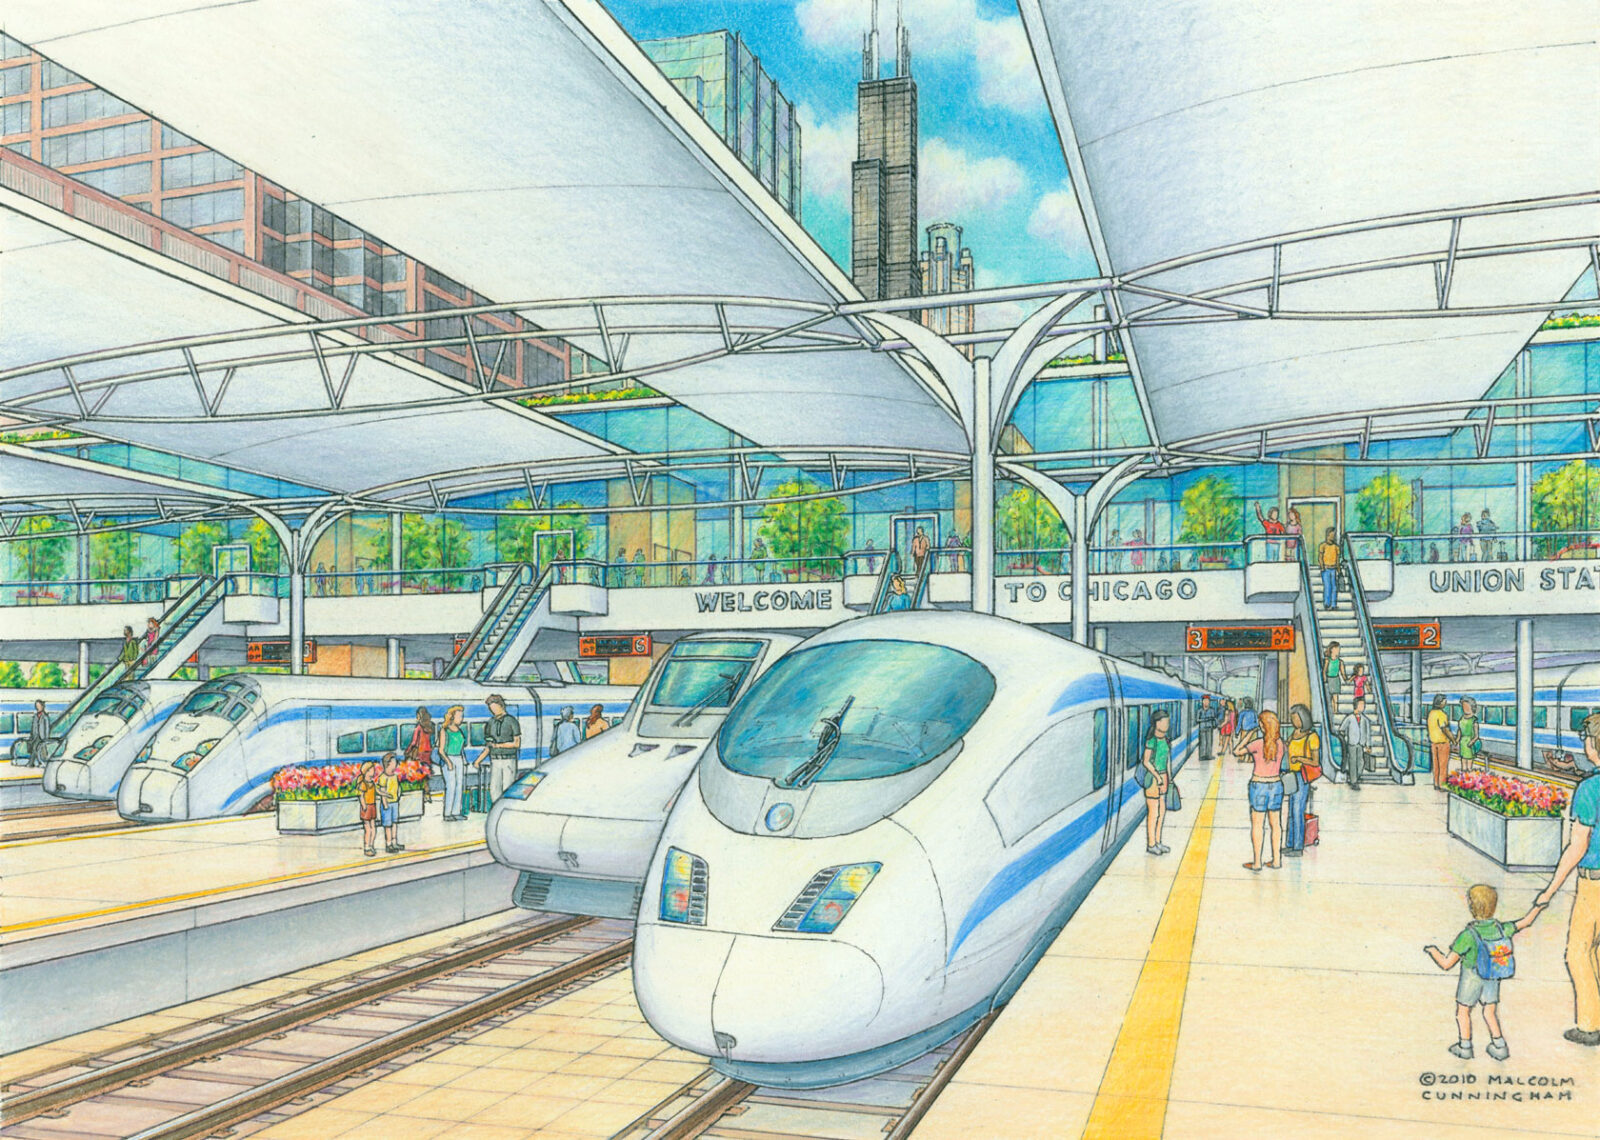 A conceptual image of a high-speed train station in Chicago.